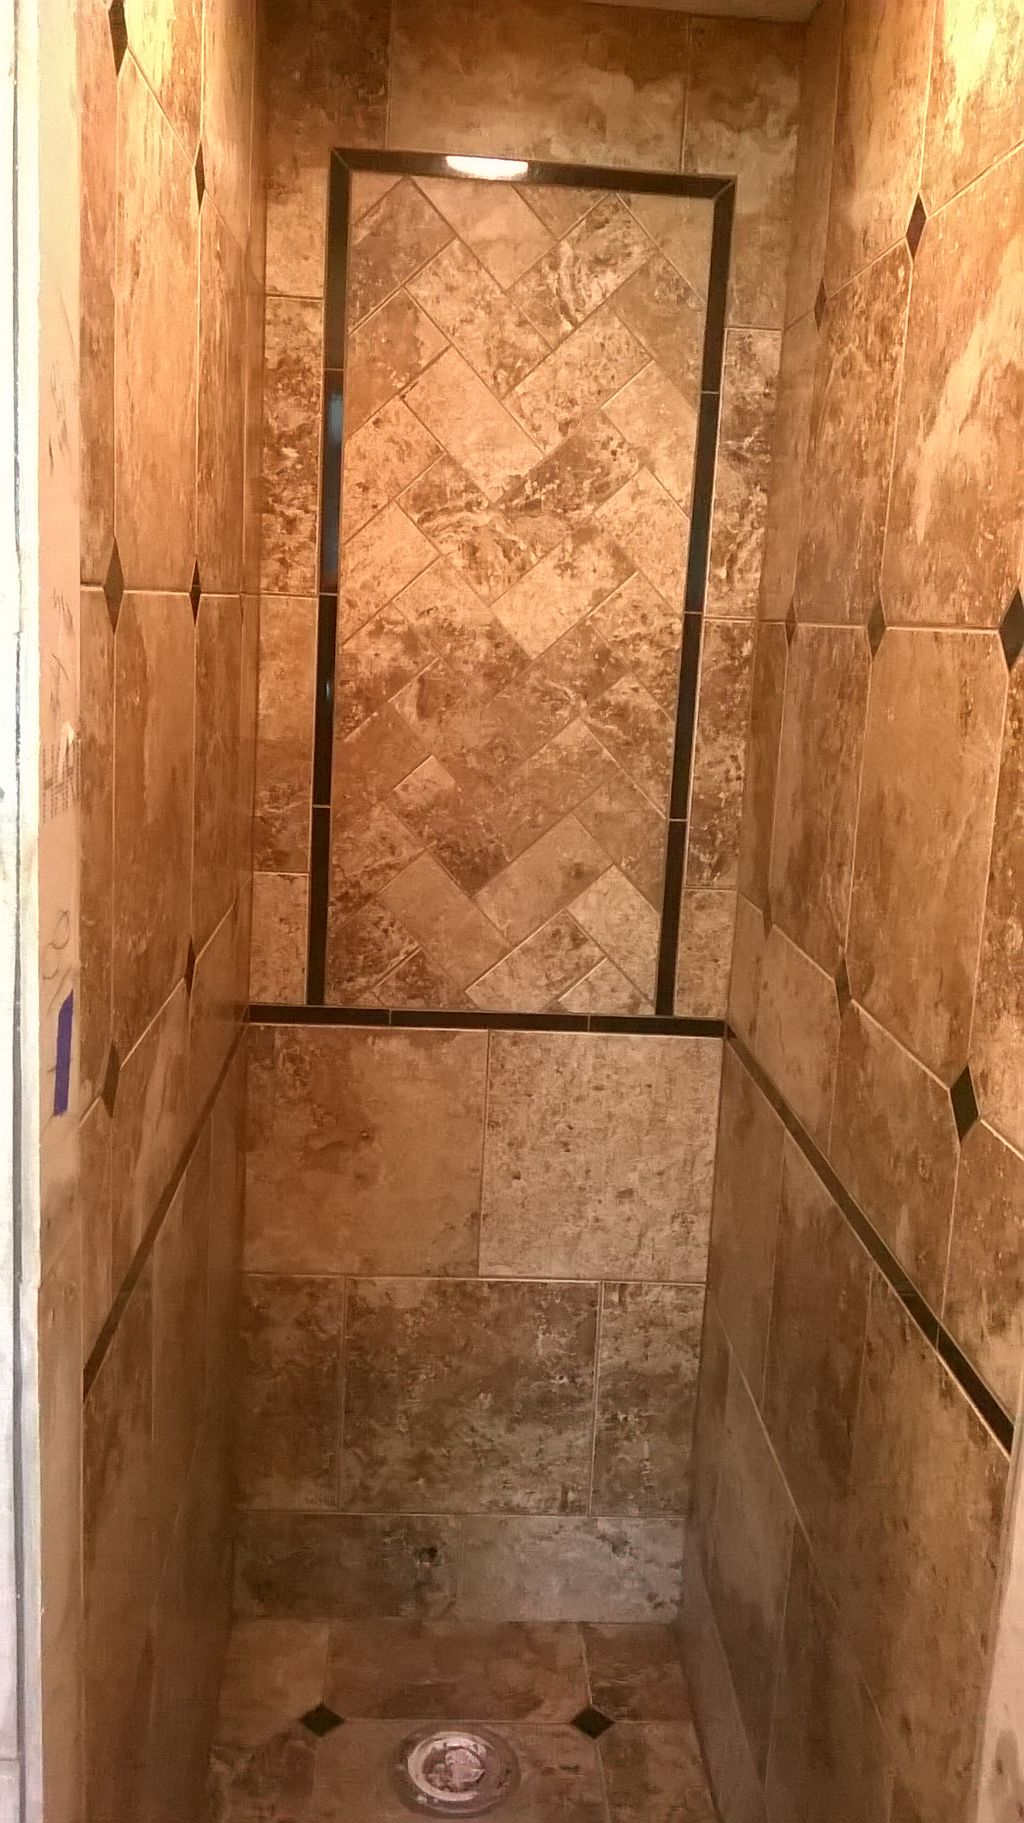 A.R.T. (Affordable Reliable Tile)